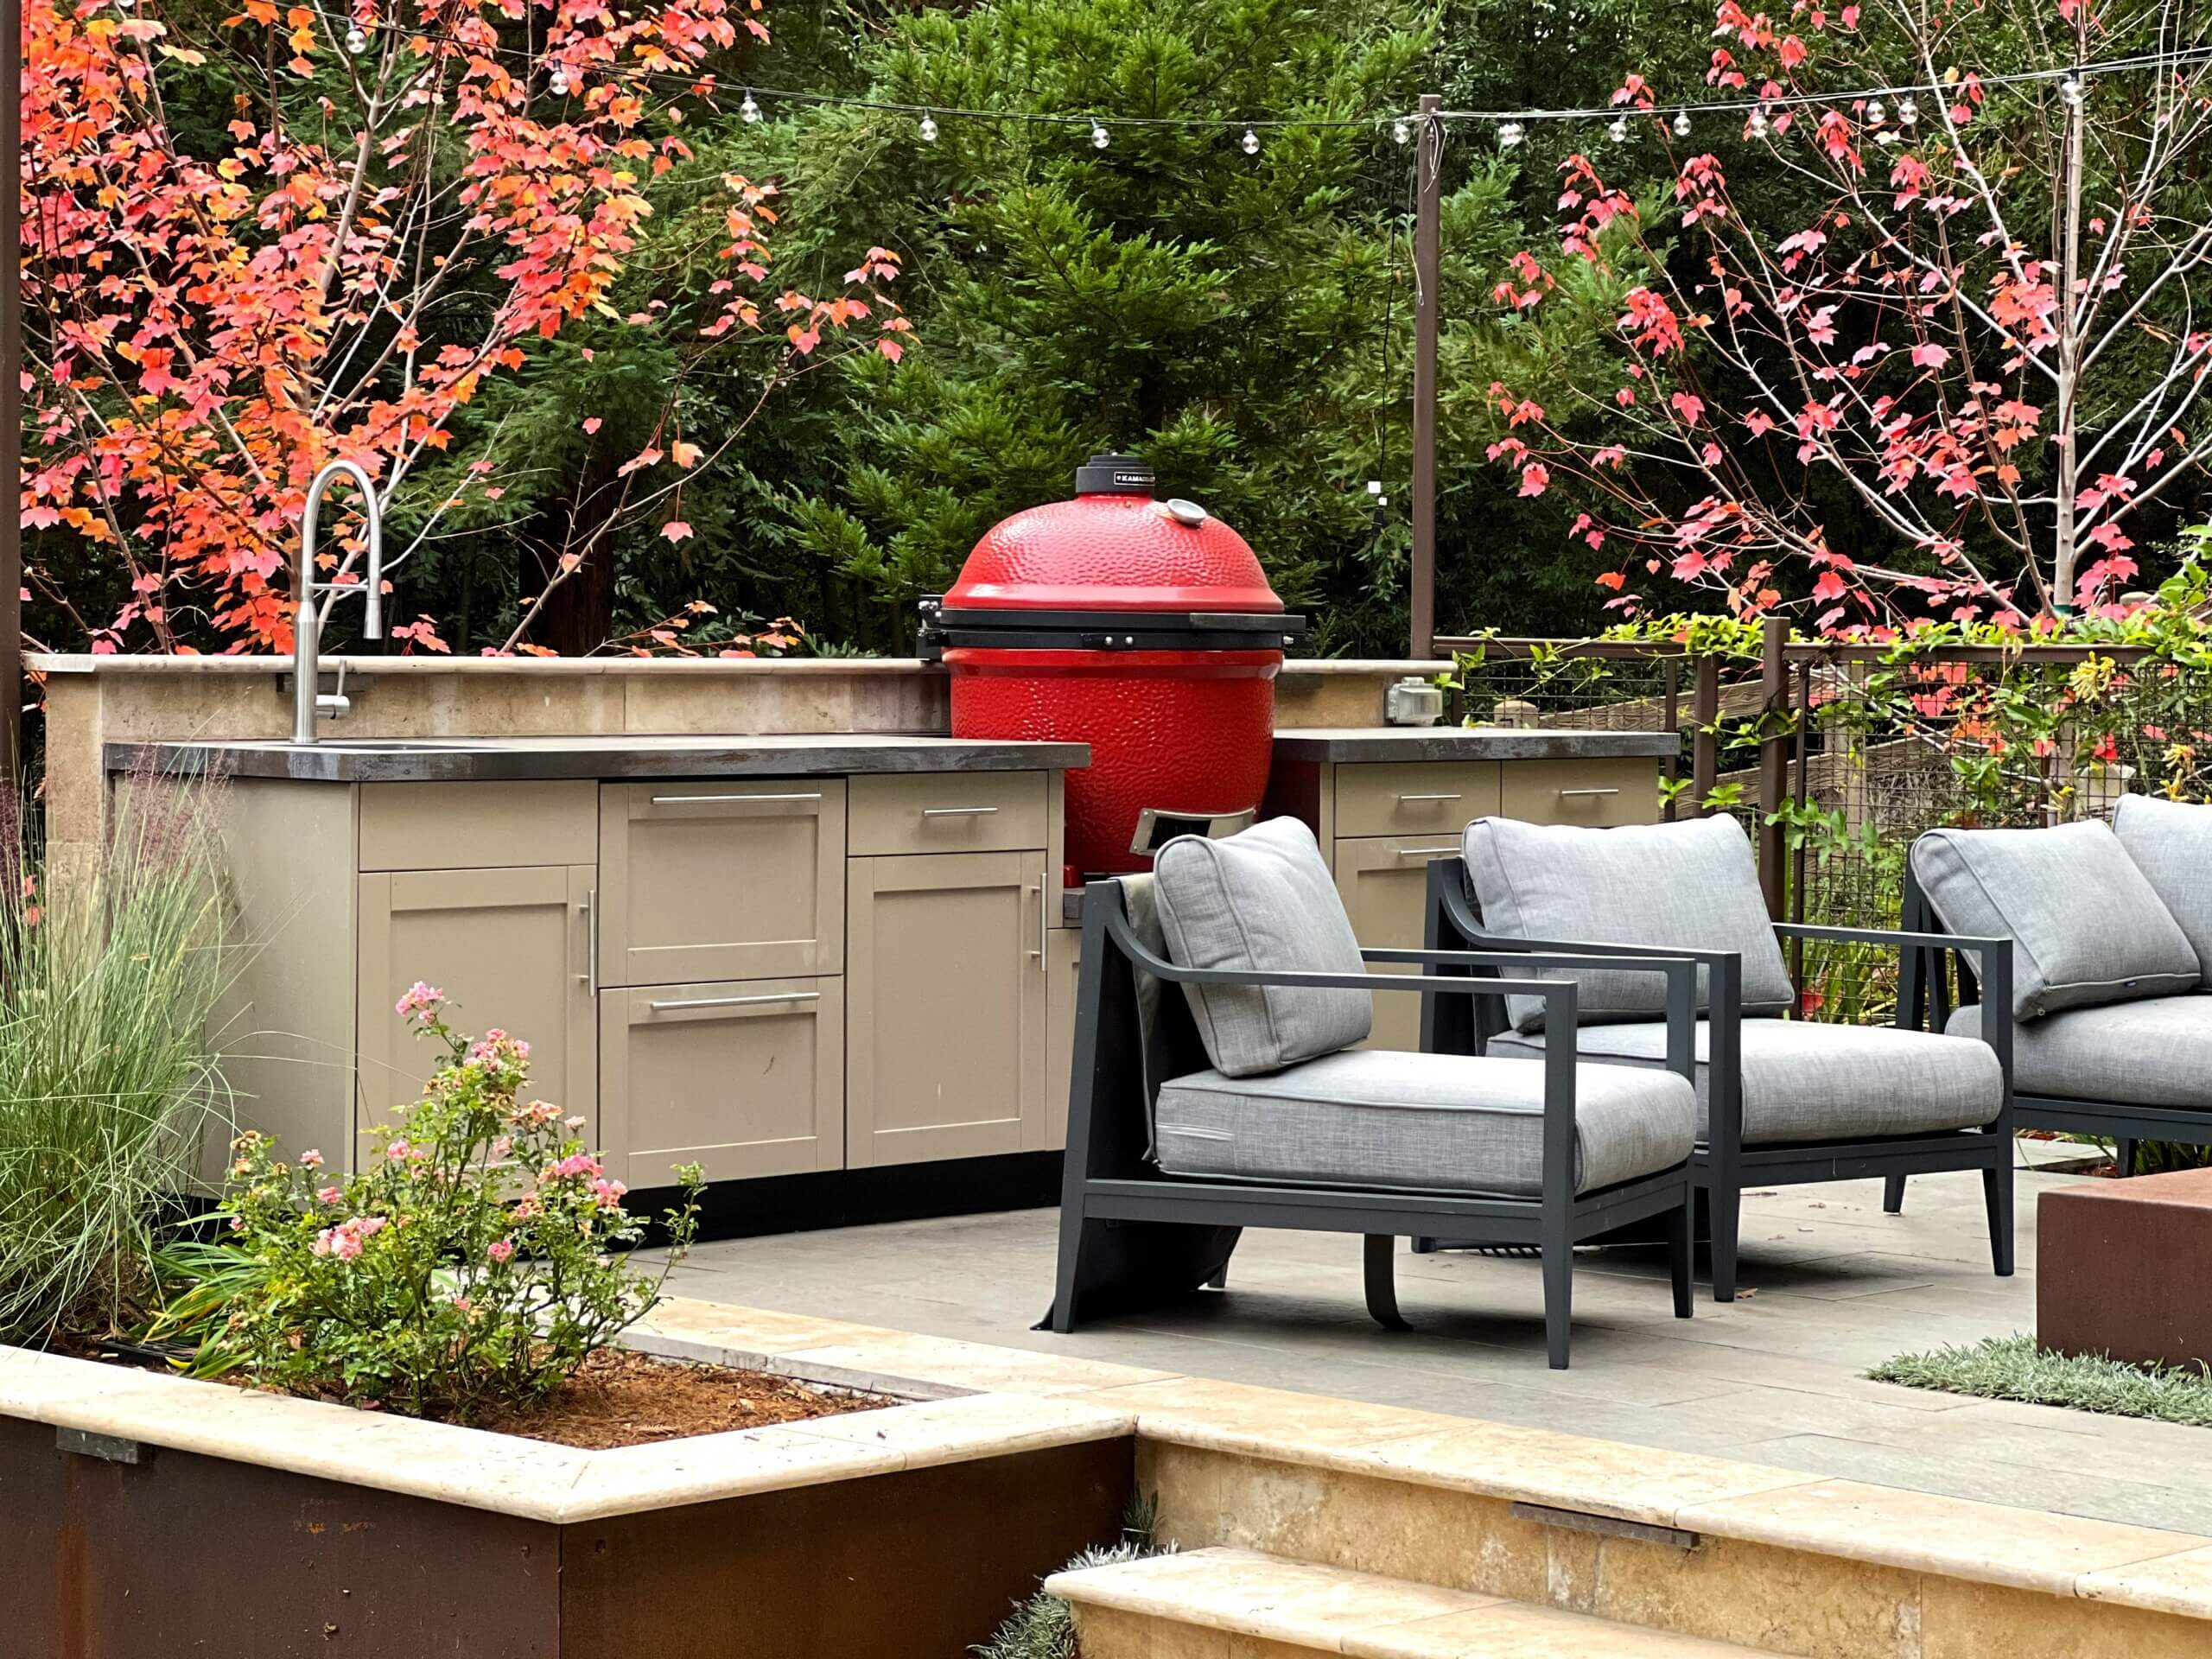 Outdoor Kitchen next to seating area and fire pit with red Kamado Joe Grill